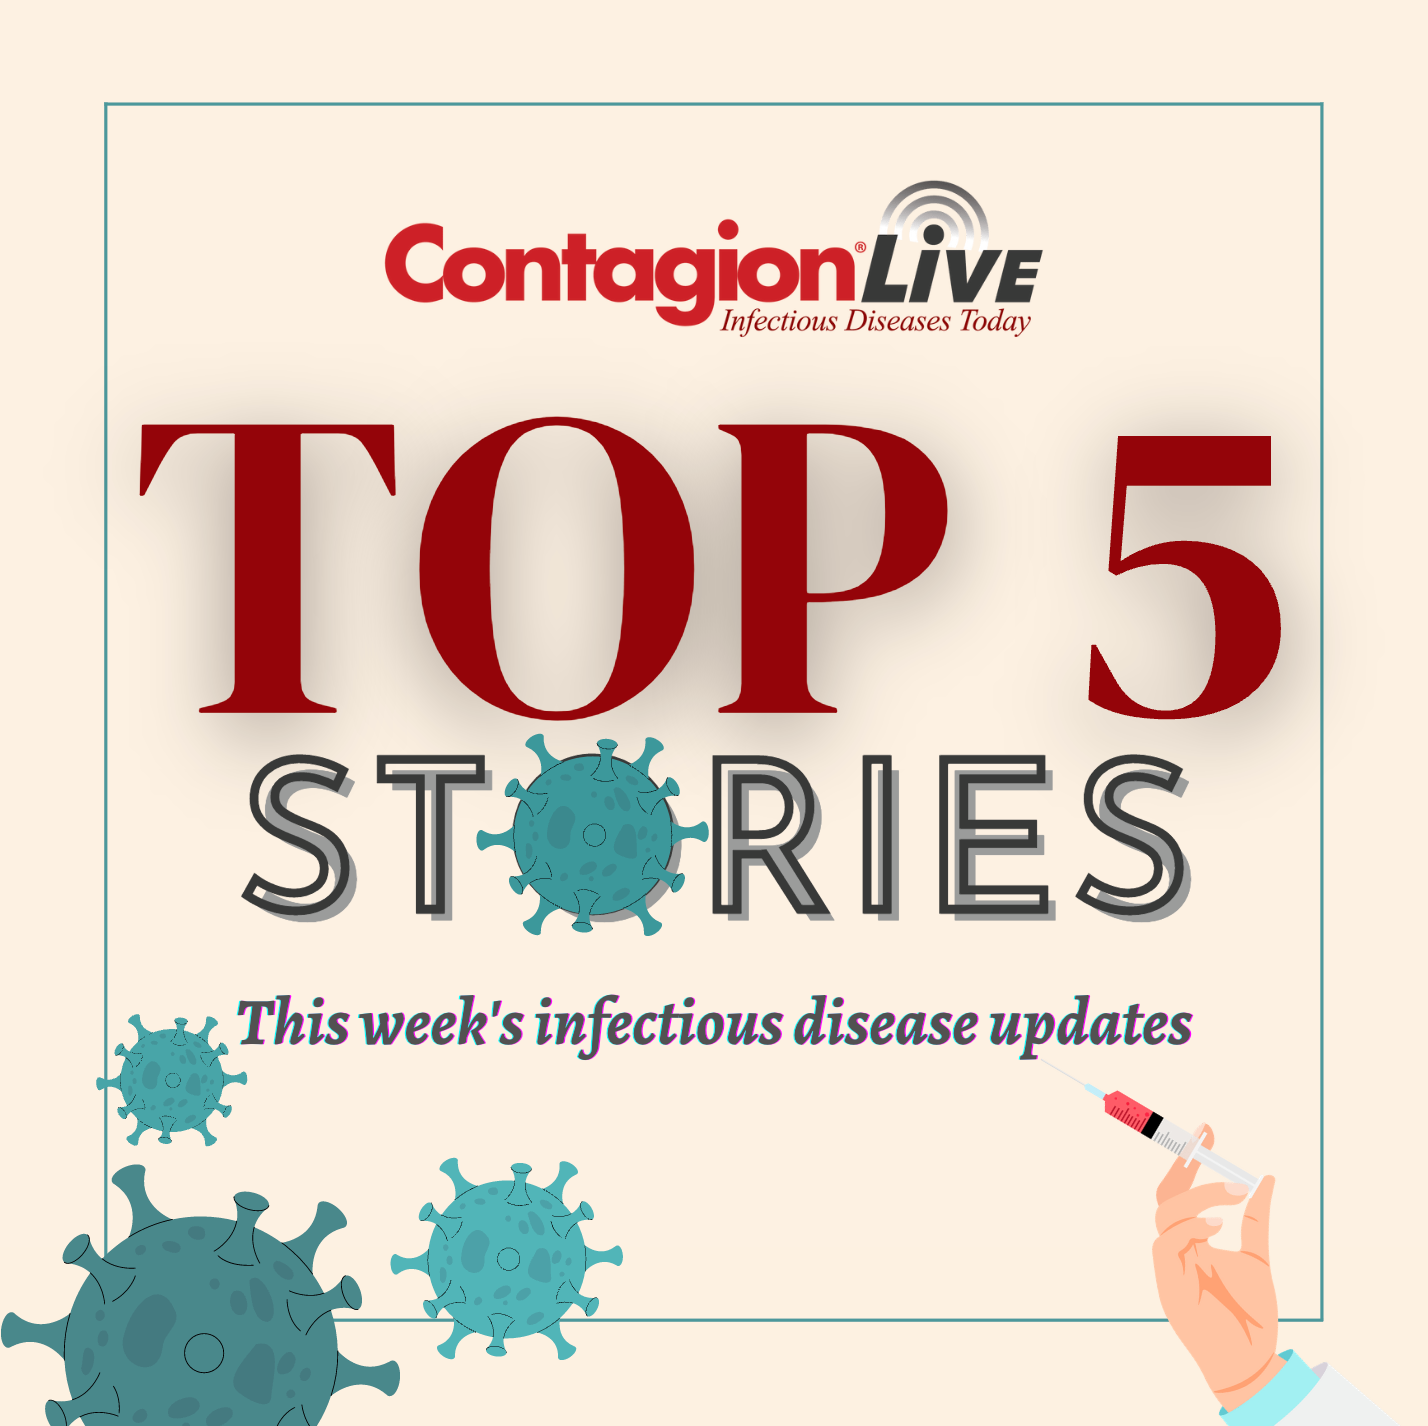 The Future of COVID-19 Vaccines, and Other Top Stories This Week